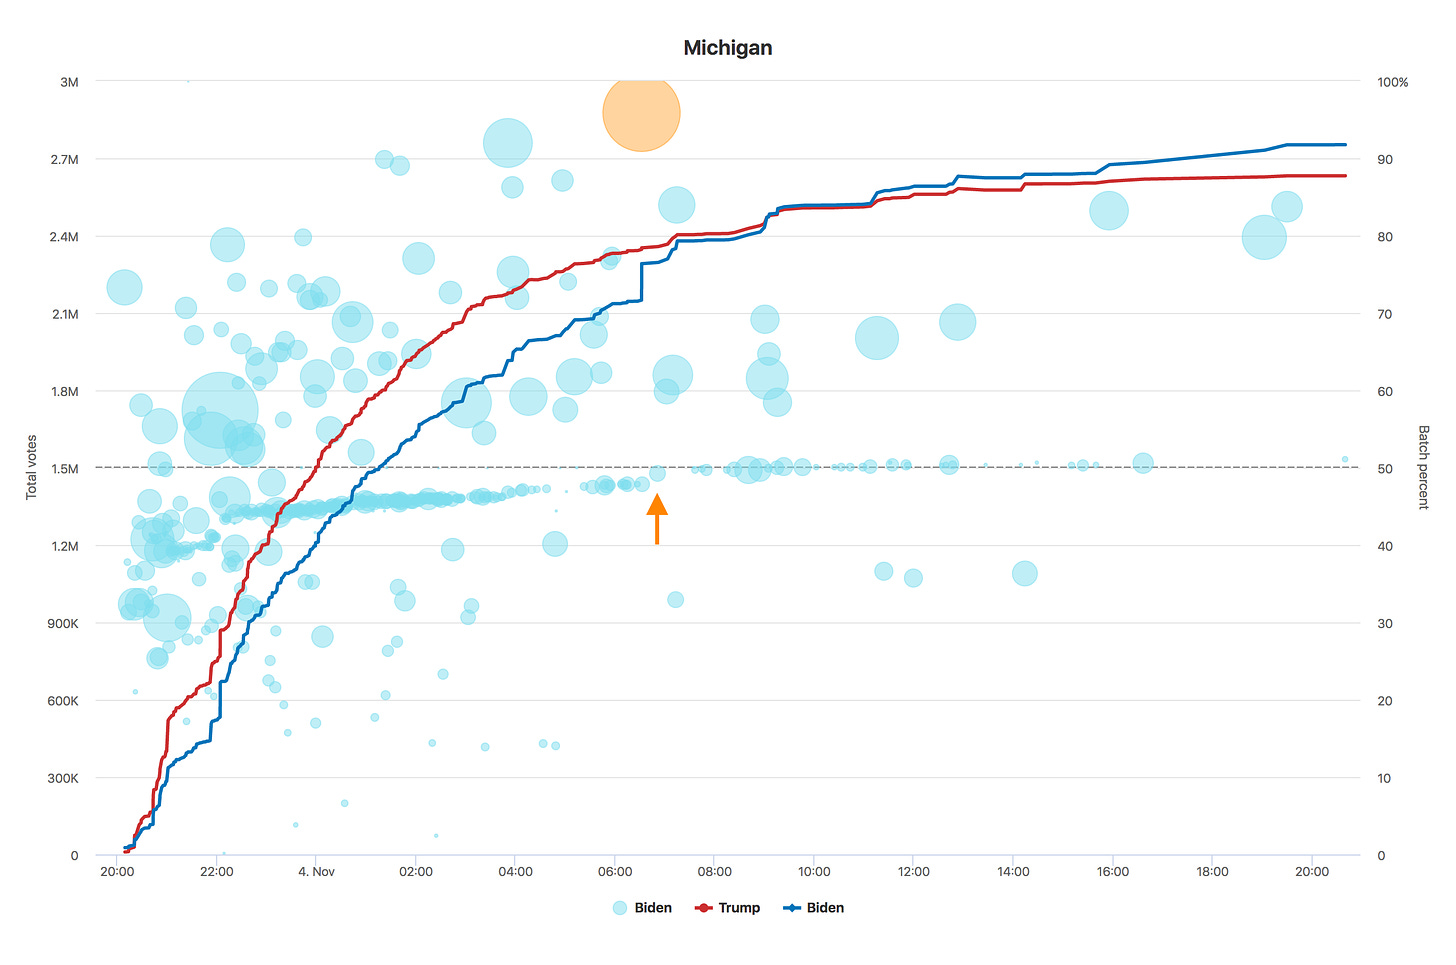 Chart of Michigan voting data over time